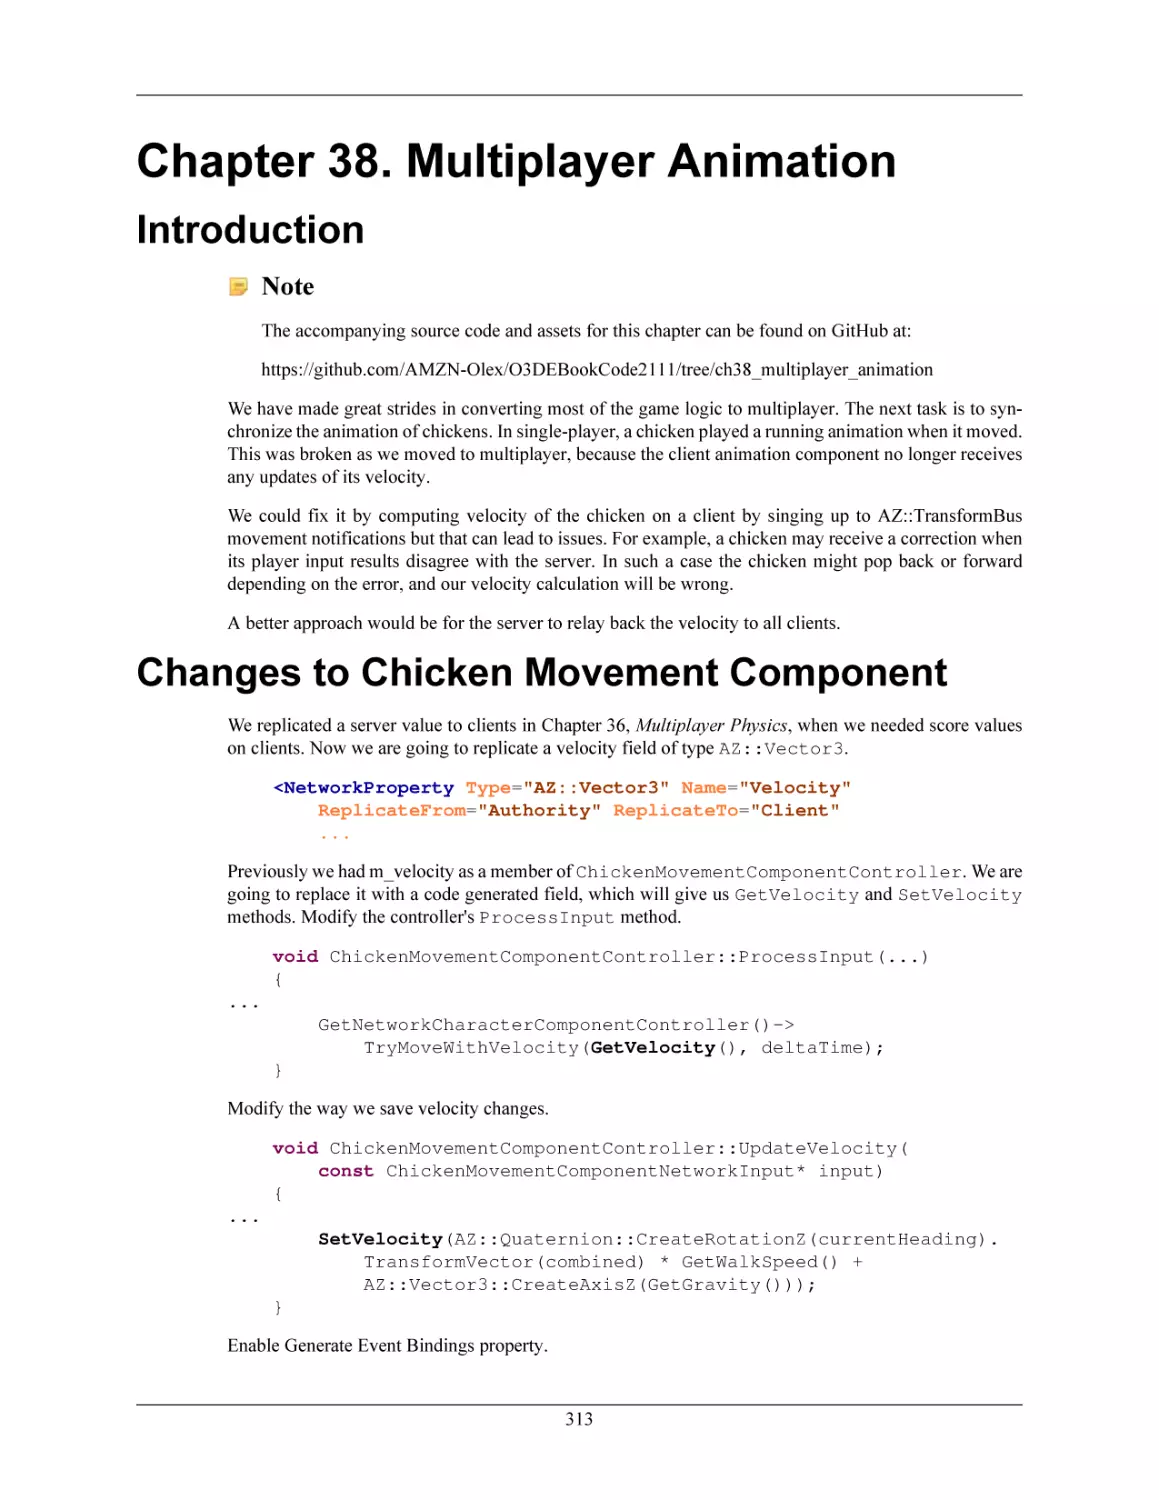 Chapter 38. Multiplayer Animation
Introduction
Changes to Chicken Movement Component